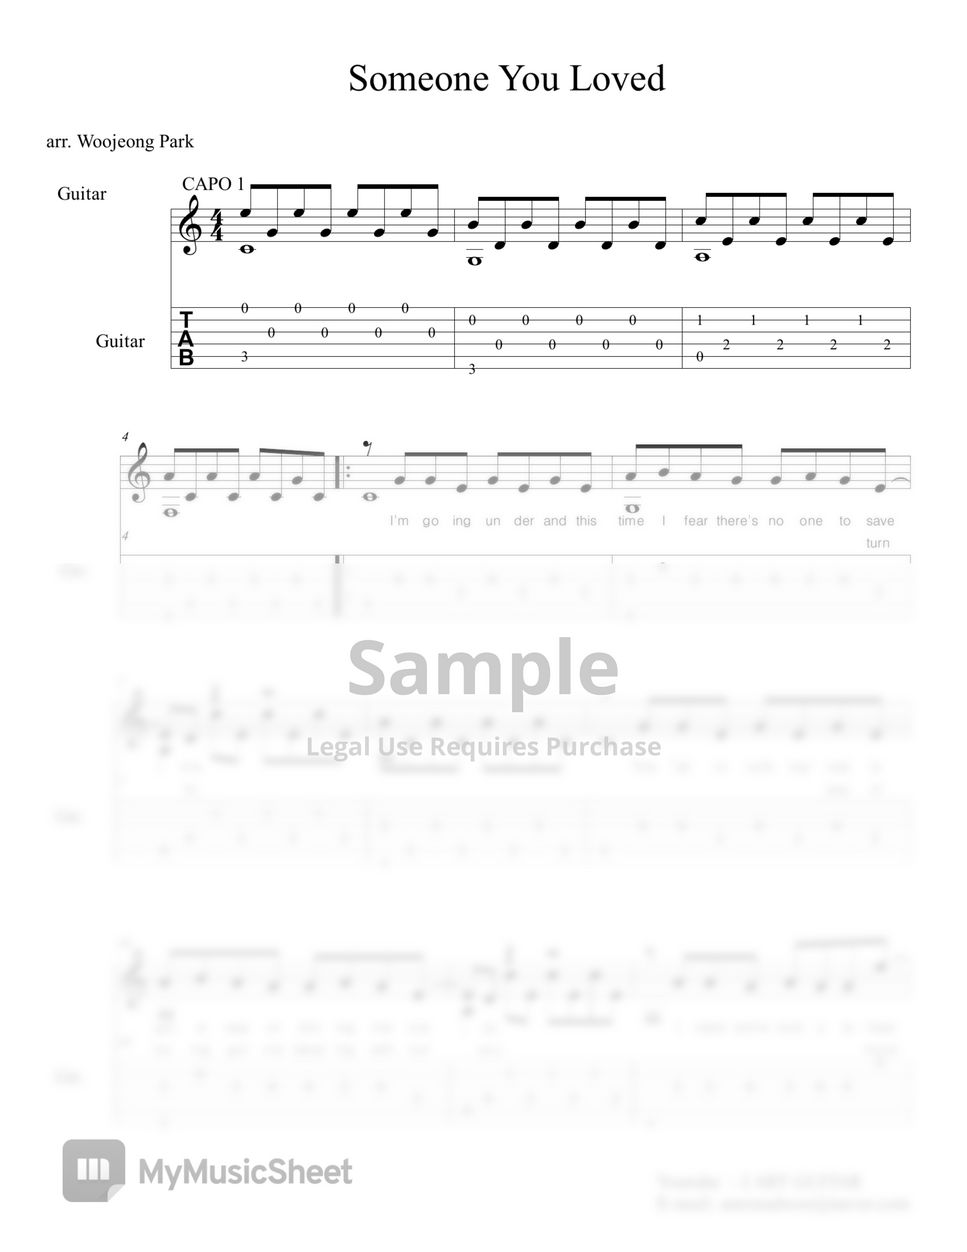 Lewis Capaldi - Someone You Loved (Guitar Tab) Sheets by Woojeong Park